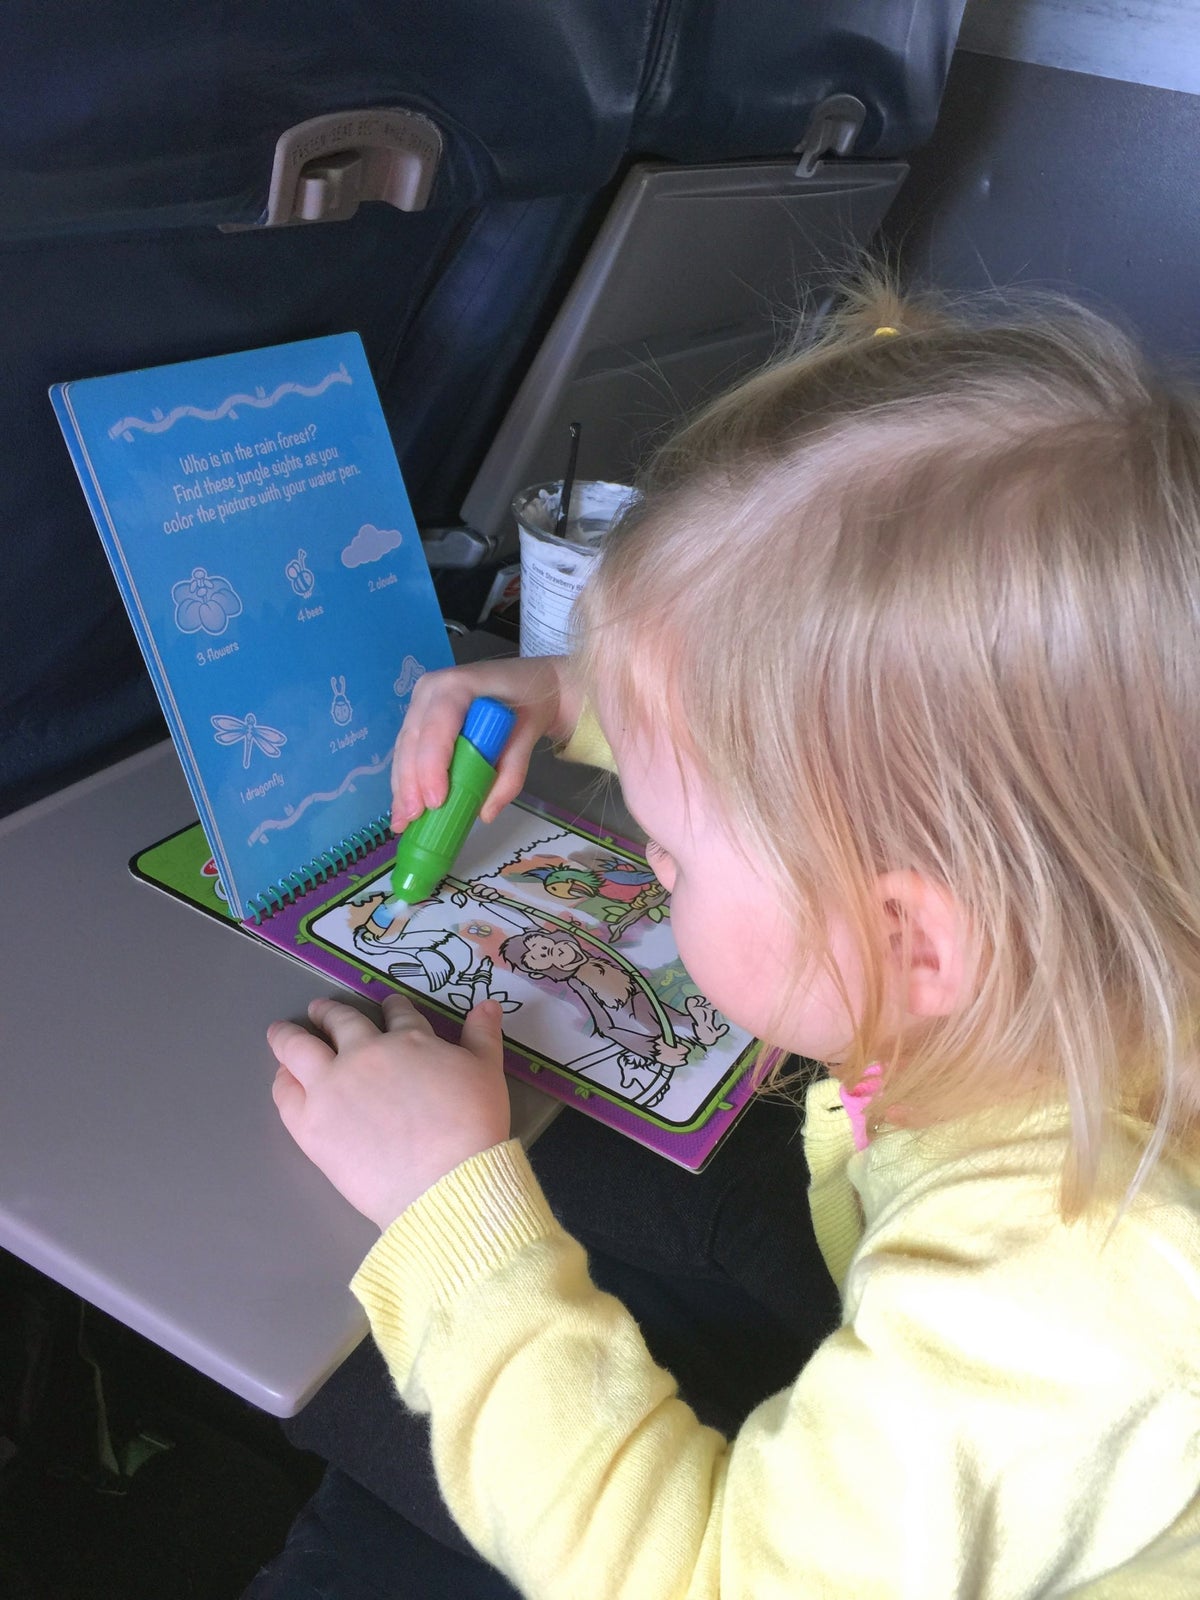 Child drawing in a coloring book while seated on an airplane.